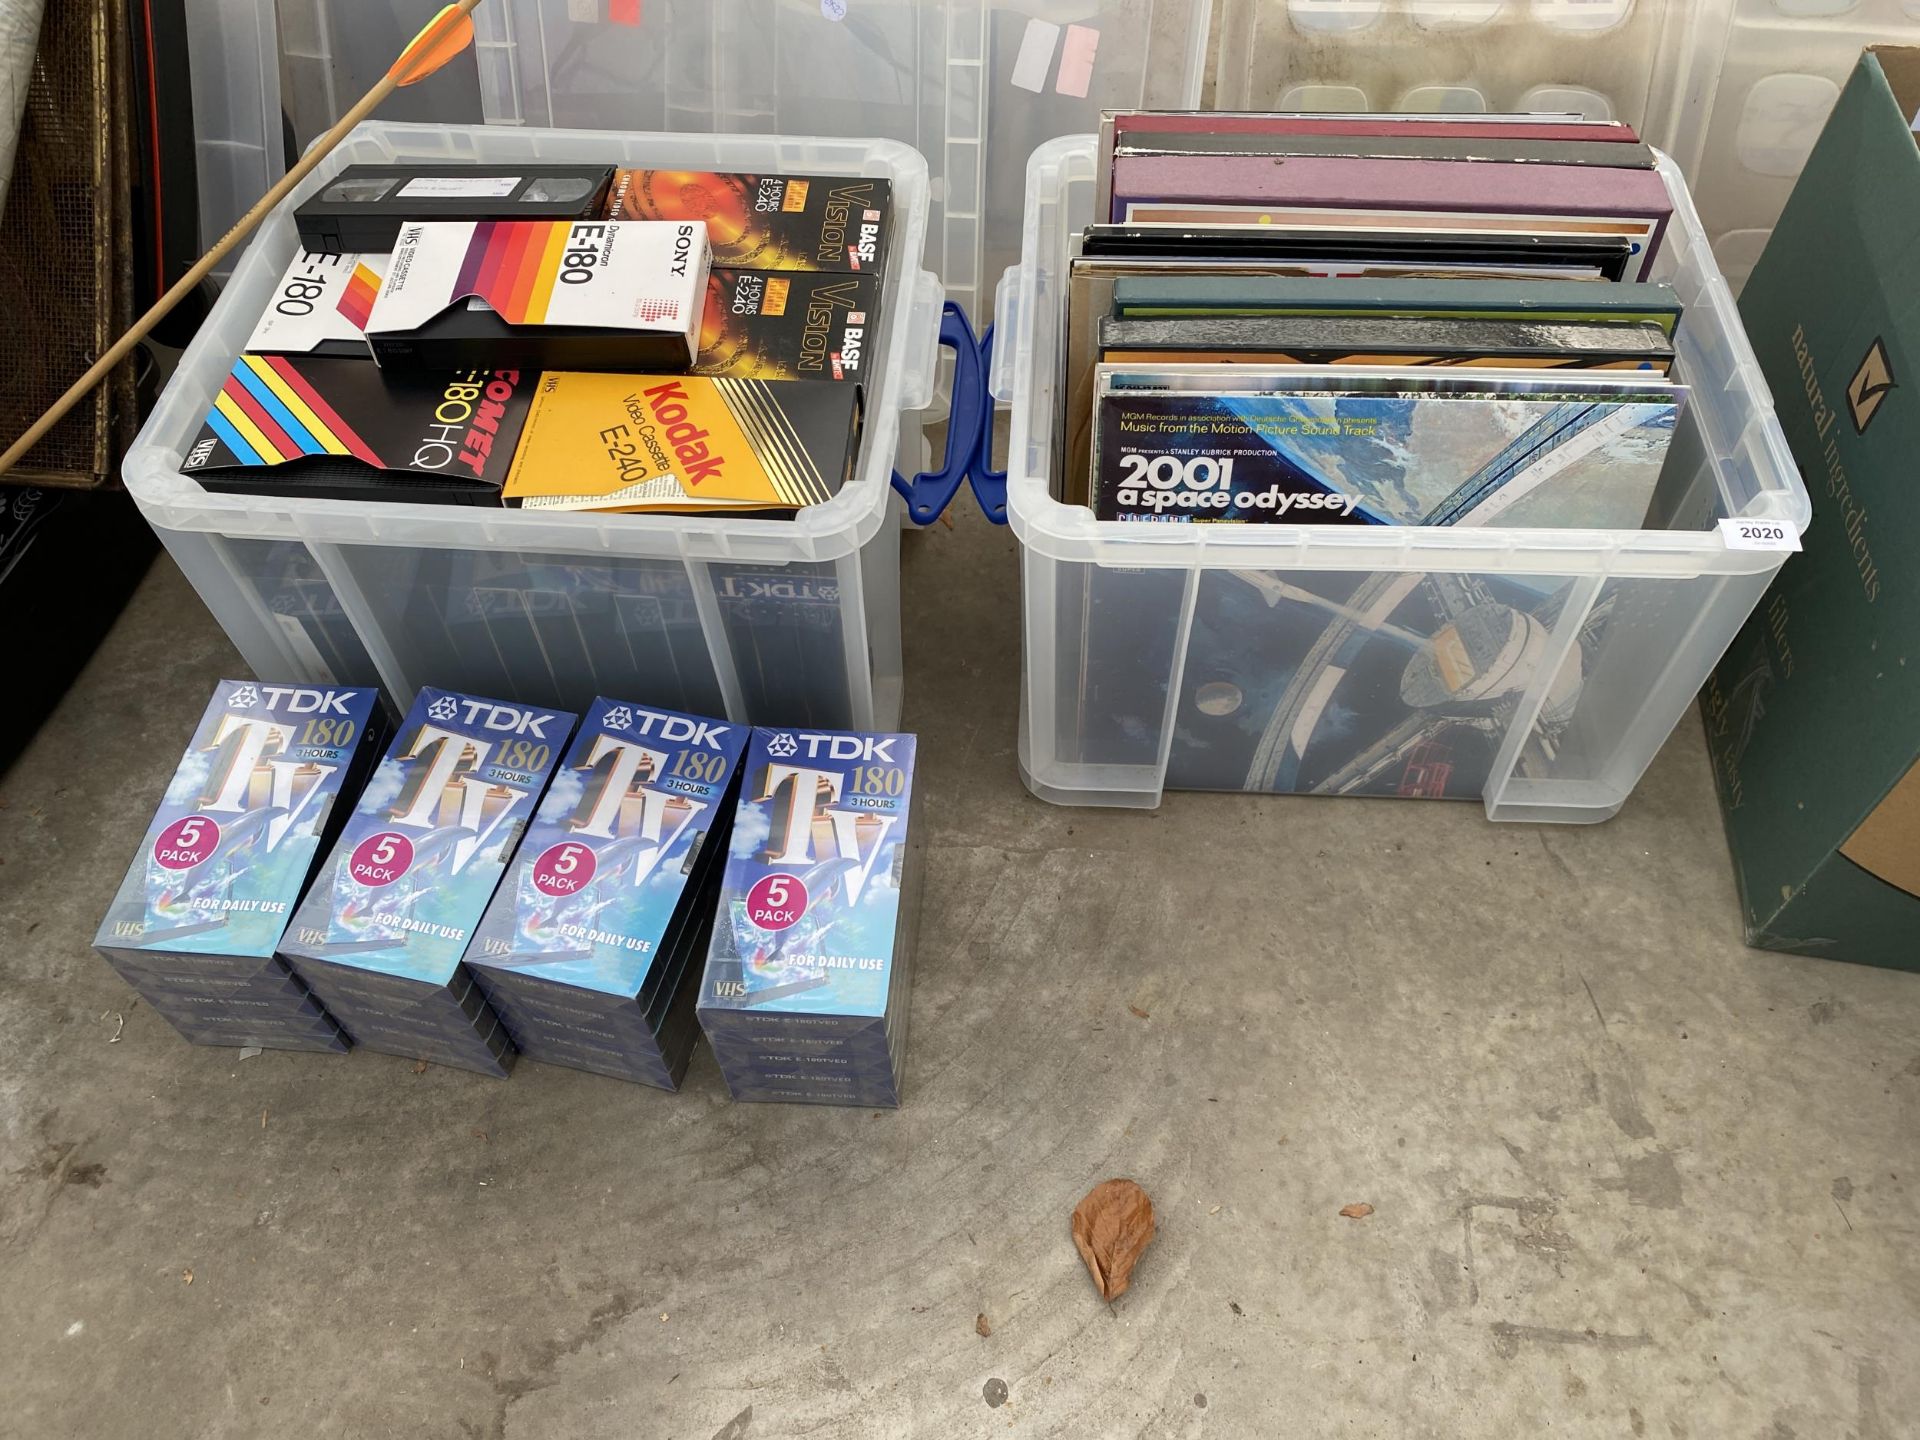 AN ASSORTMENT OF LP RECORDS AND VHS VIDEOS